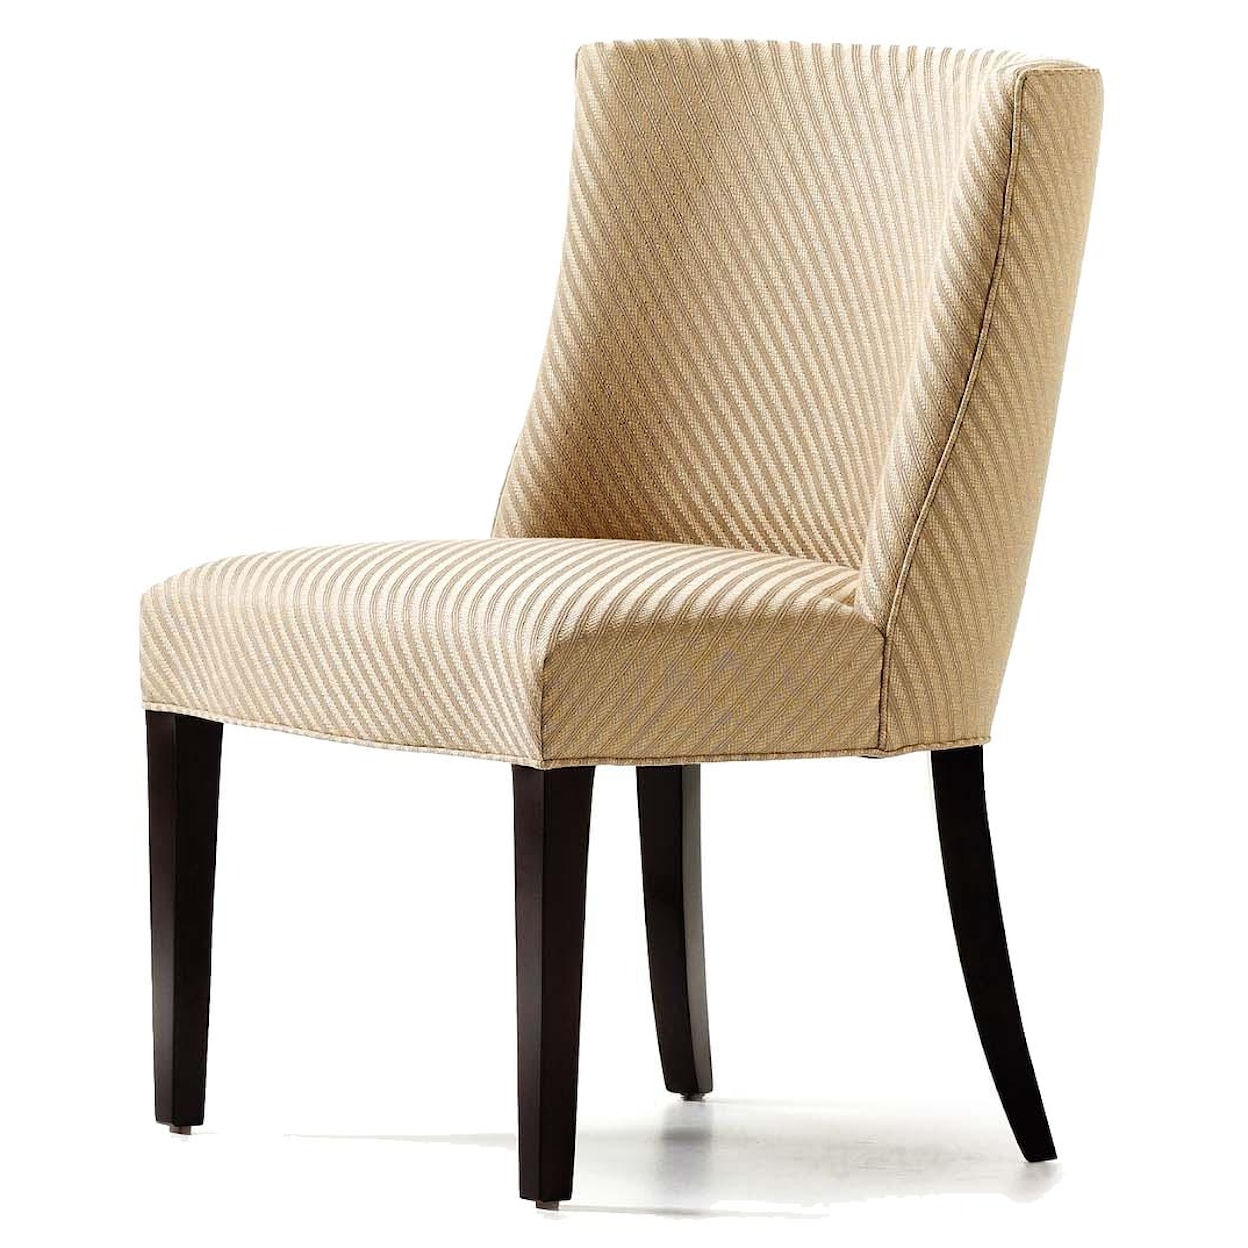 Jessica Charles Fine Upholstered Accents Oscar Chair   